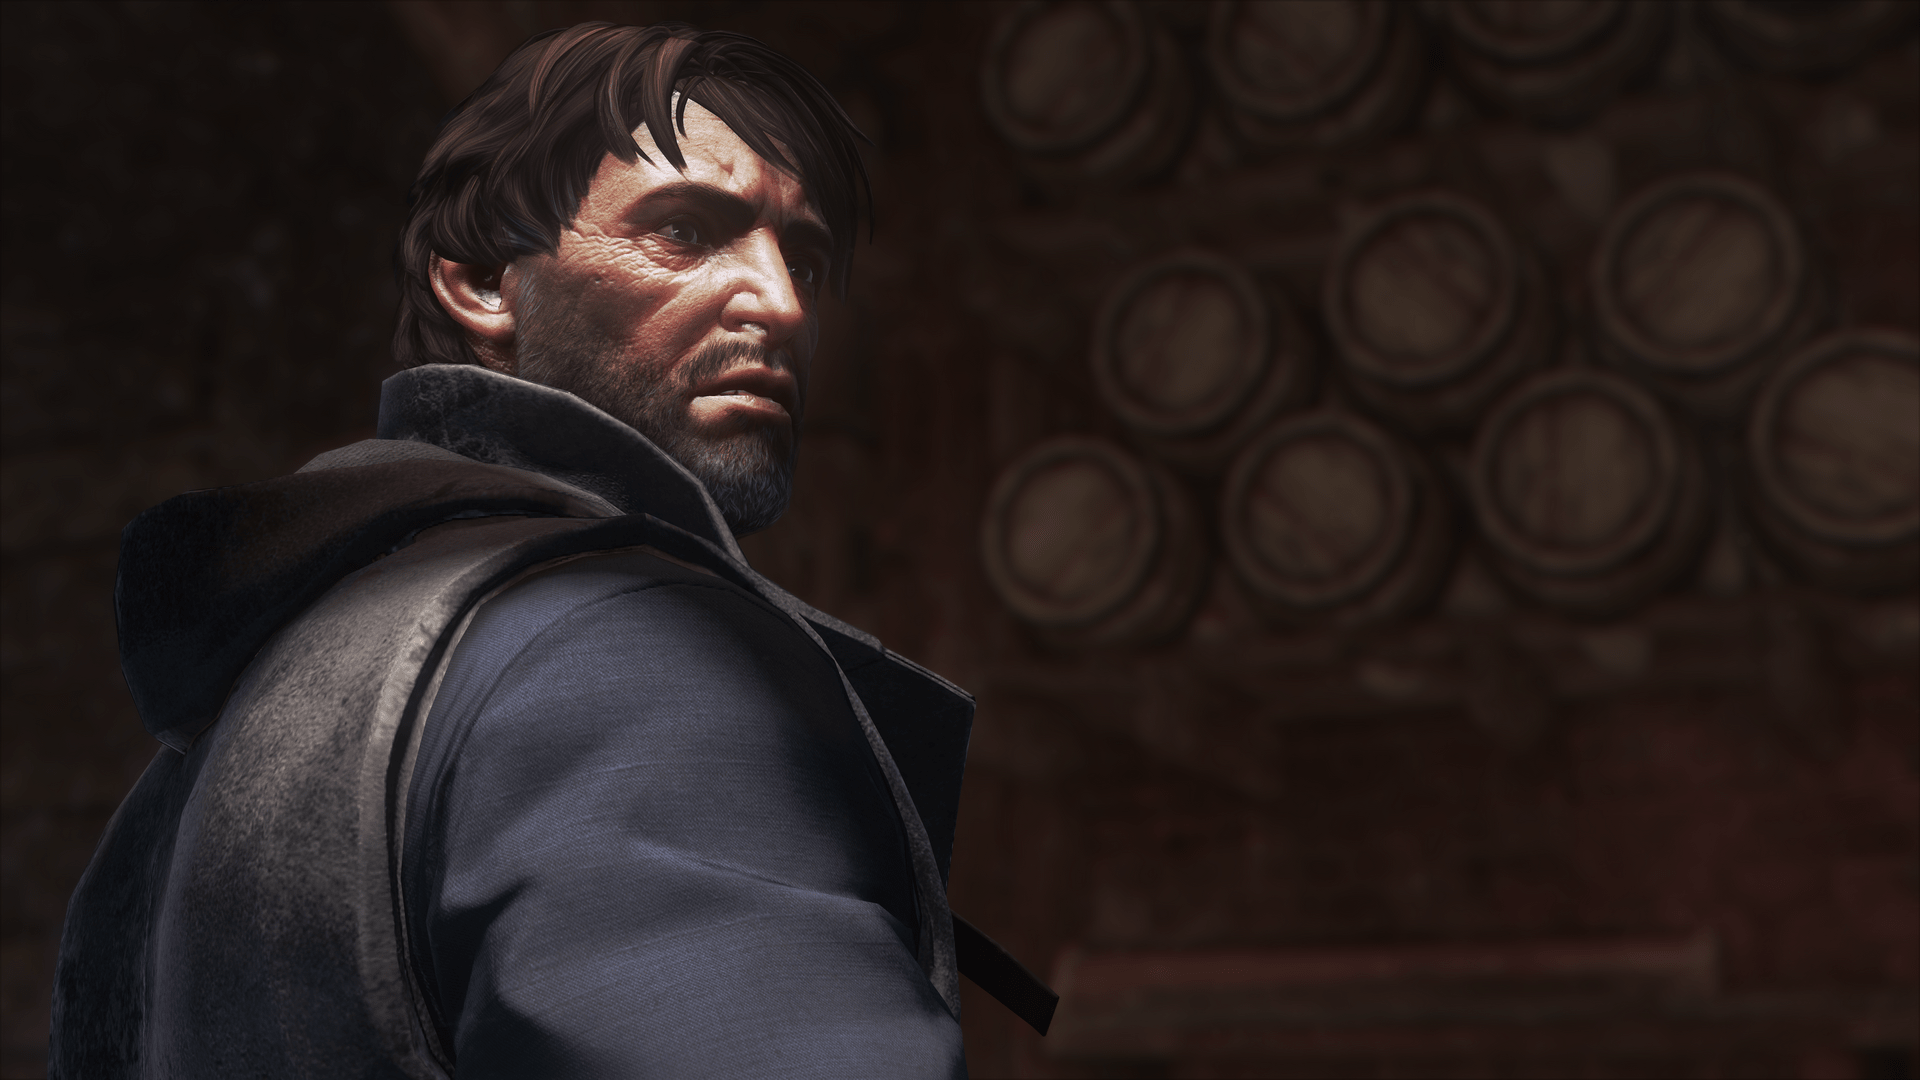 Corvo's body is facing away, and he is looking over his right shoulder into the distance.